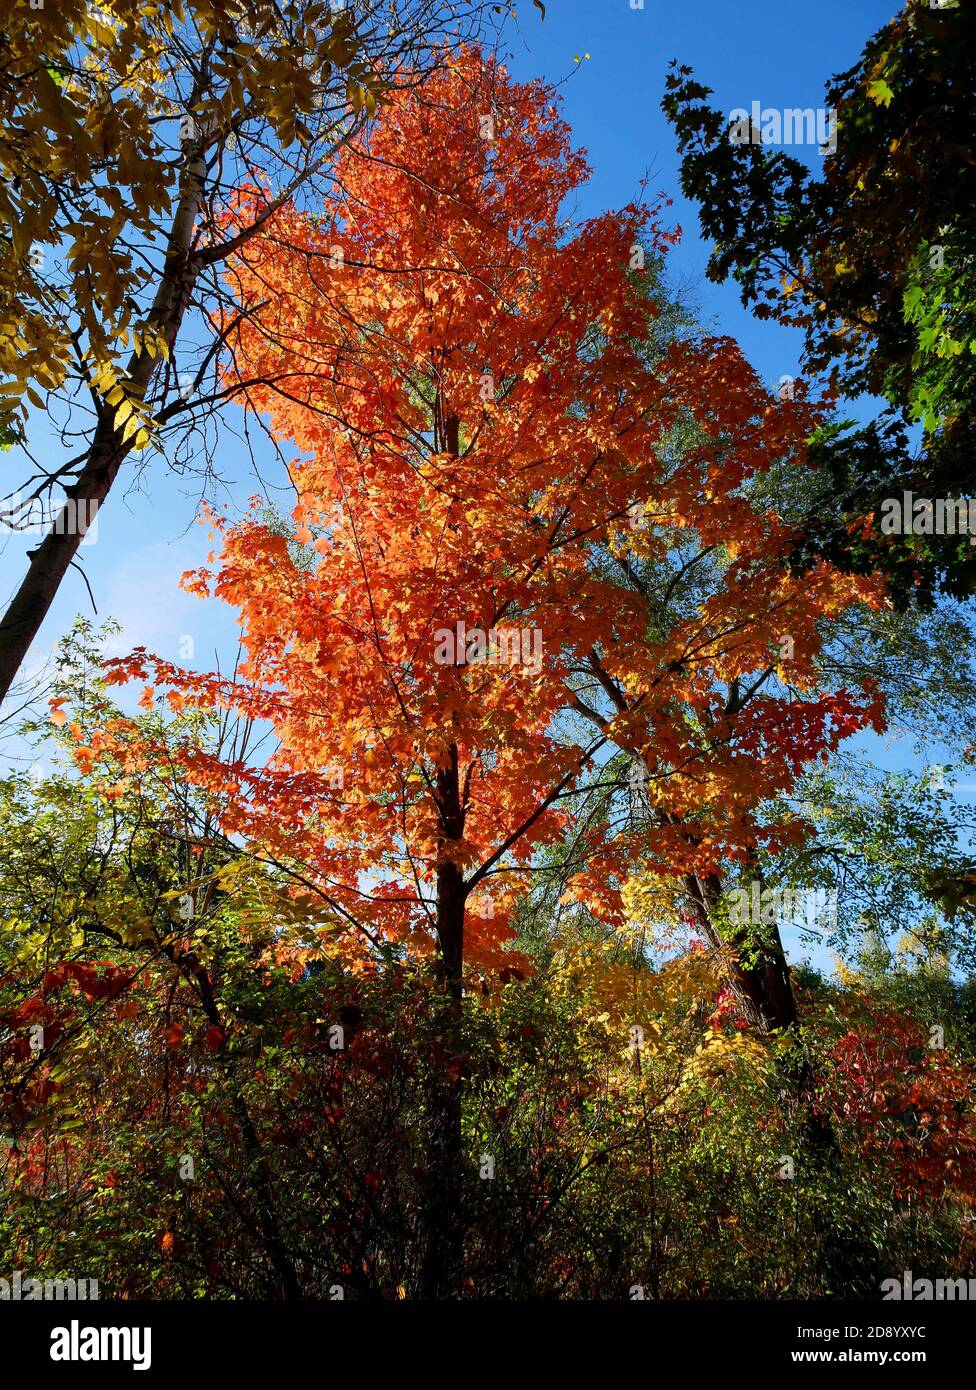 Small Maple Tree Against A Sunny Blue Sky With Orange Red Leaves Autumn Fall Ontario Canada Stock Photo